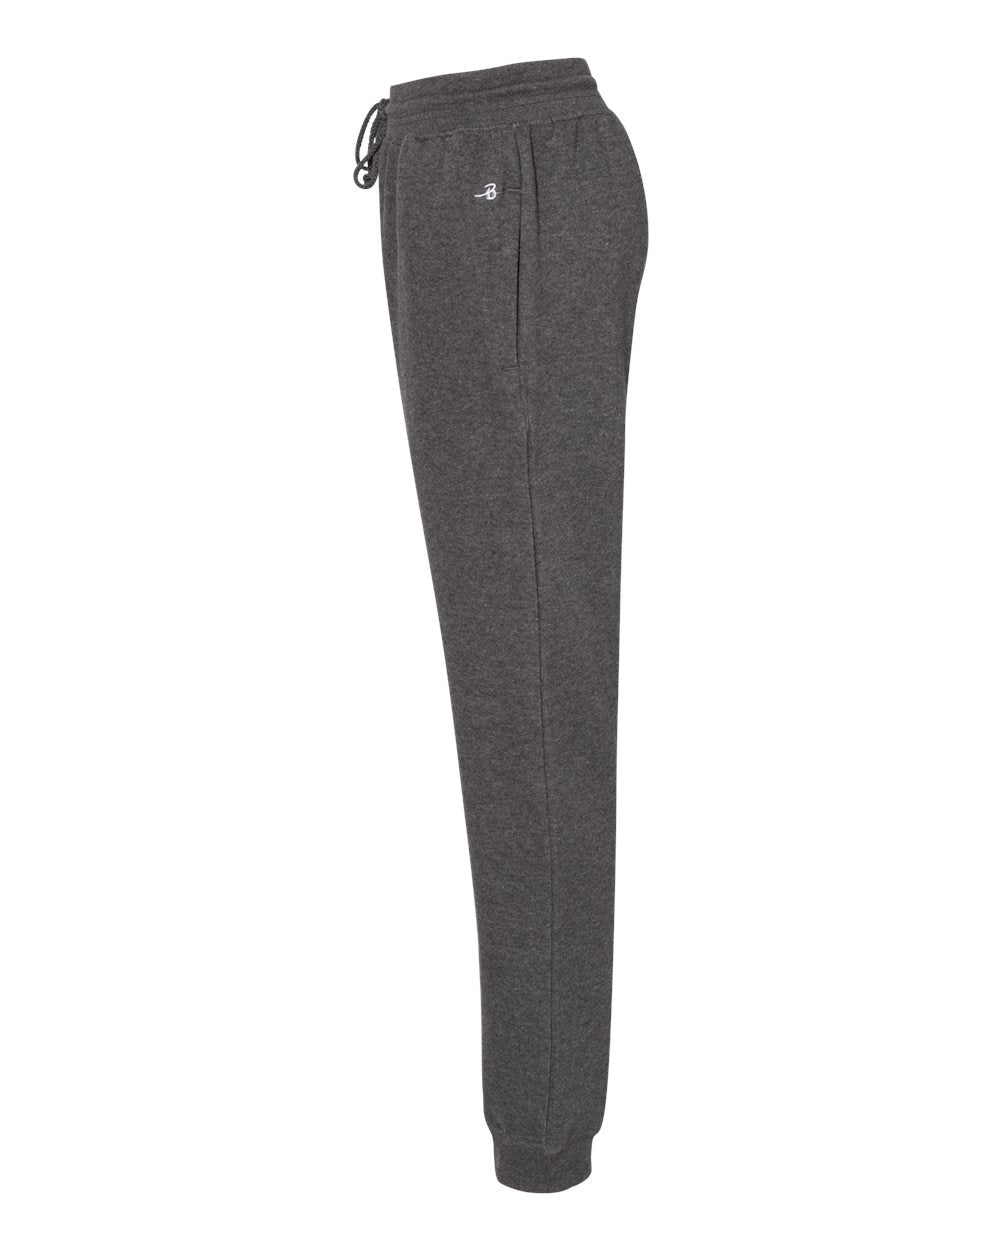 Lady Texans Woman's Fit Joggers